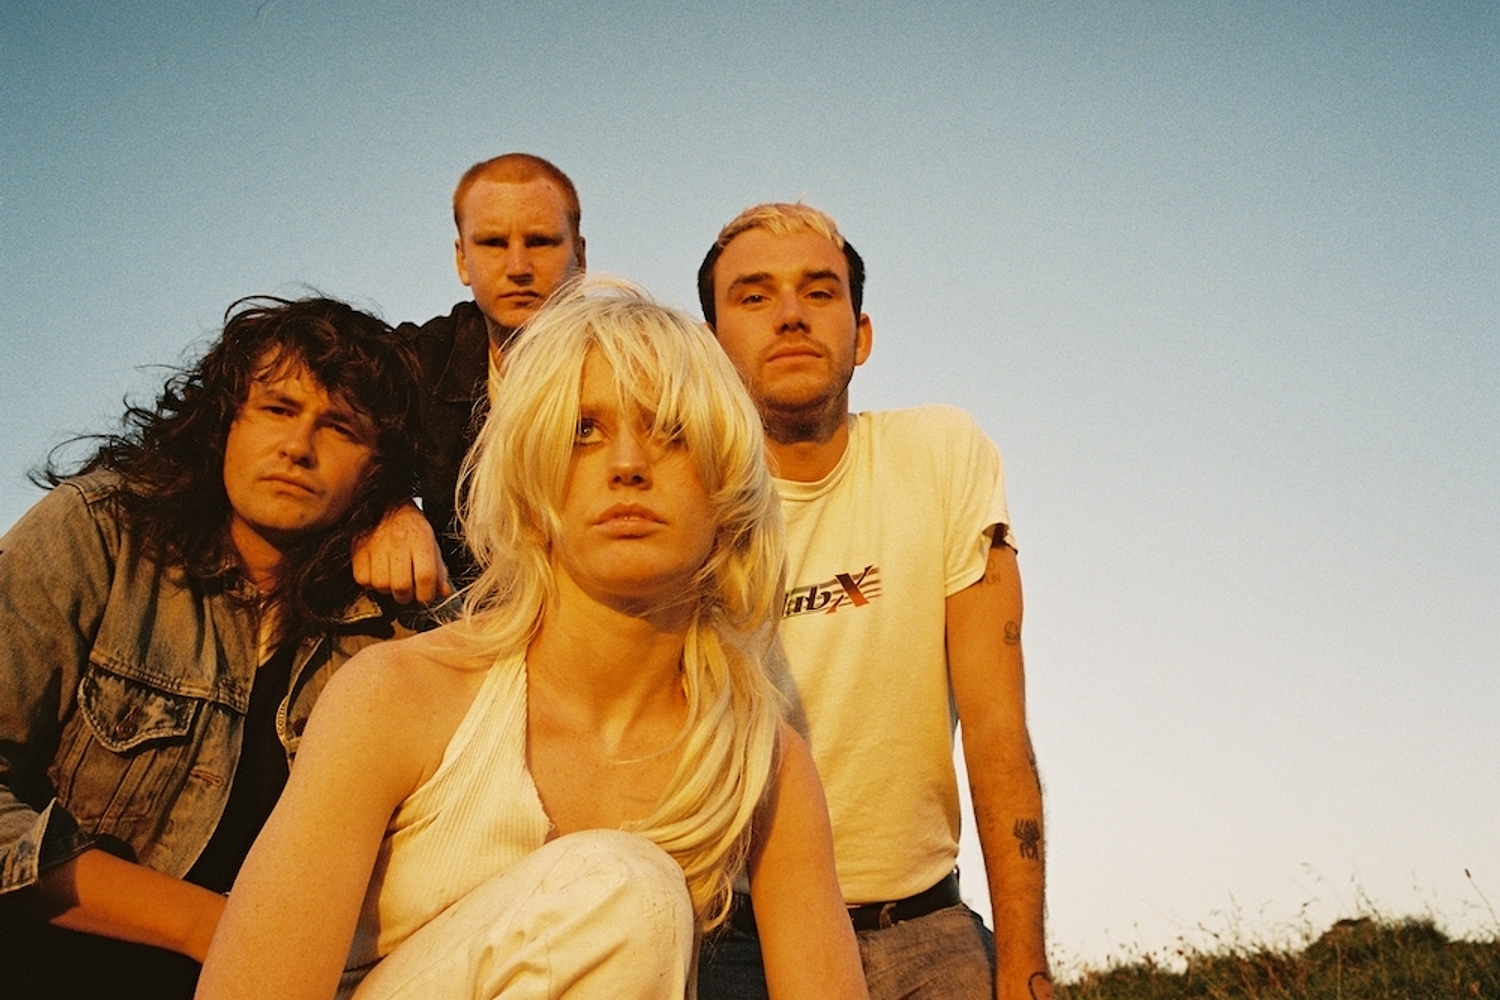 Amyl and The Sniffers announce new album ‘Comfort to Me’